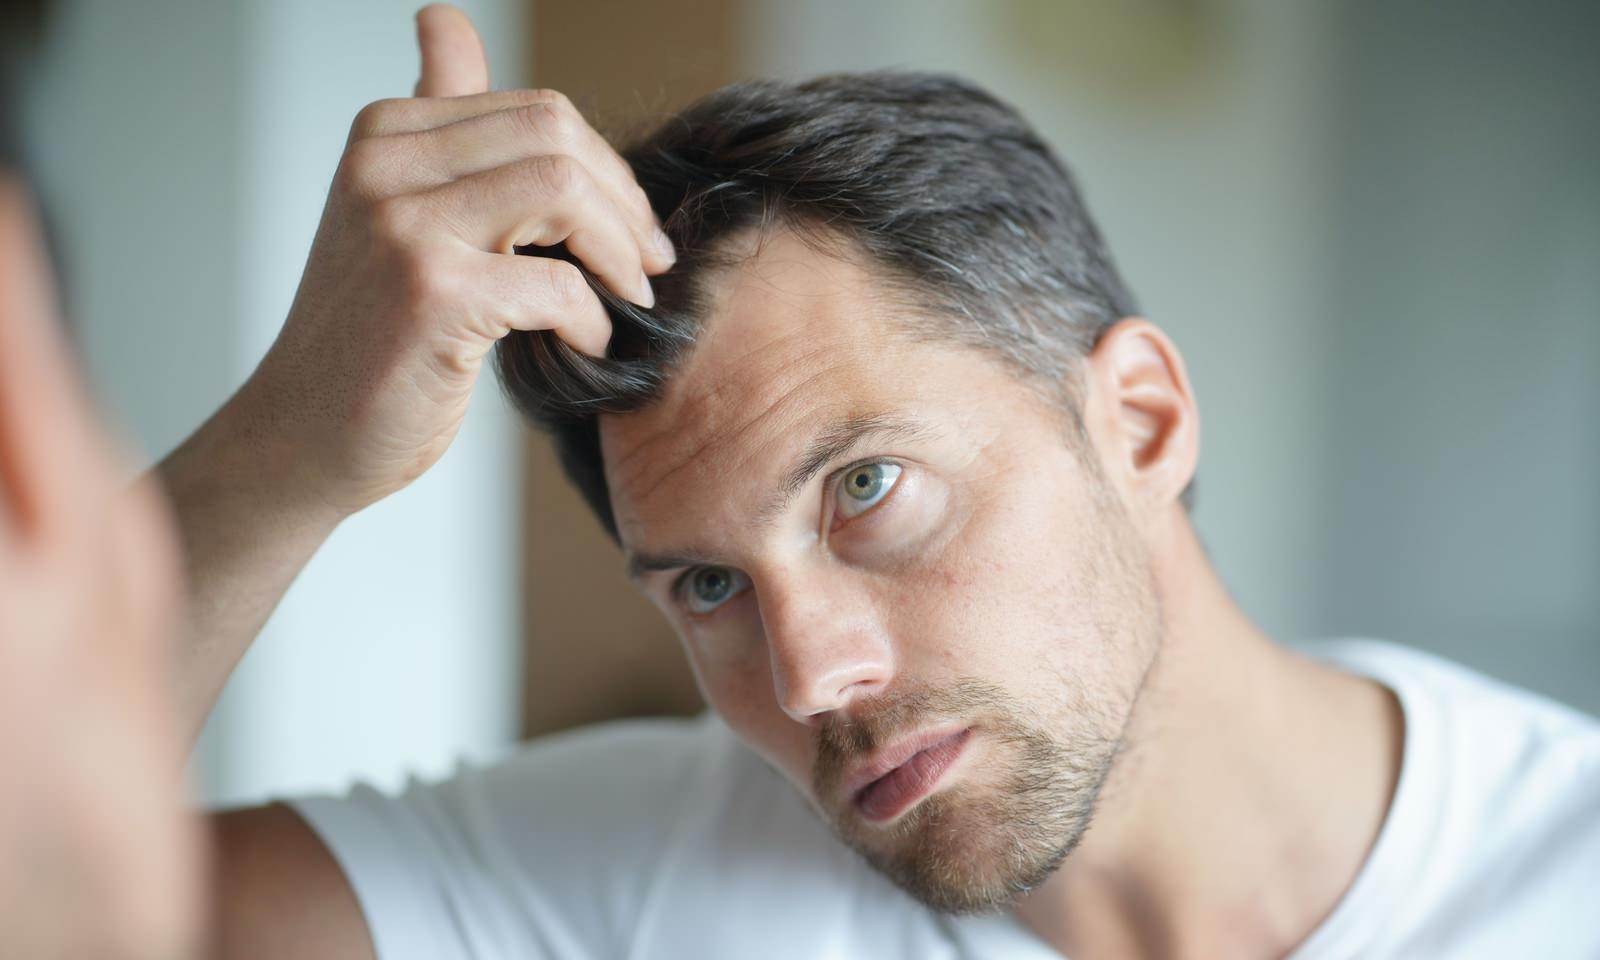 An overview of FUT Hair Transplant in Toronto